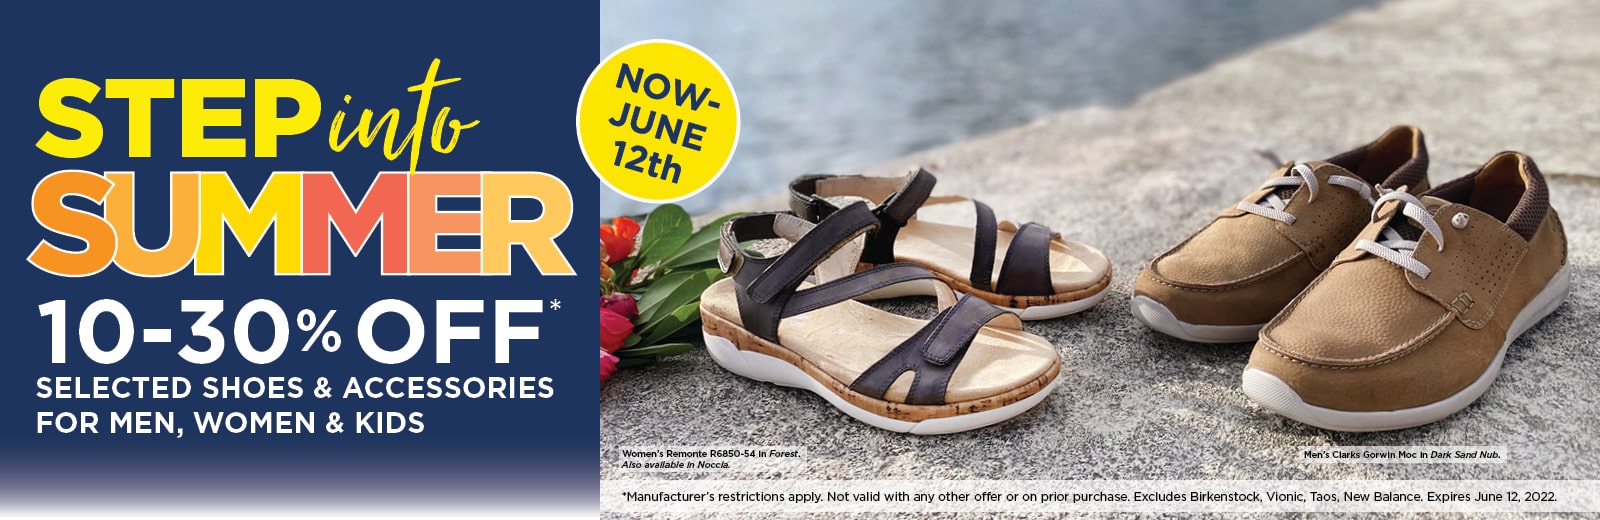 Step into Summer with 10 to 30% off selected shoes and accessories for men, women and kids